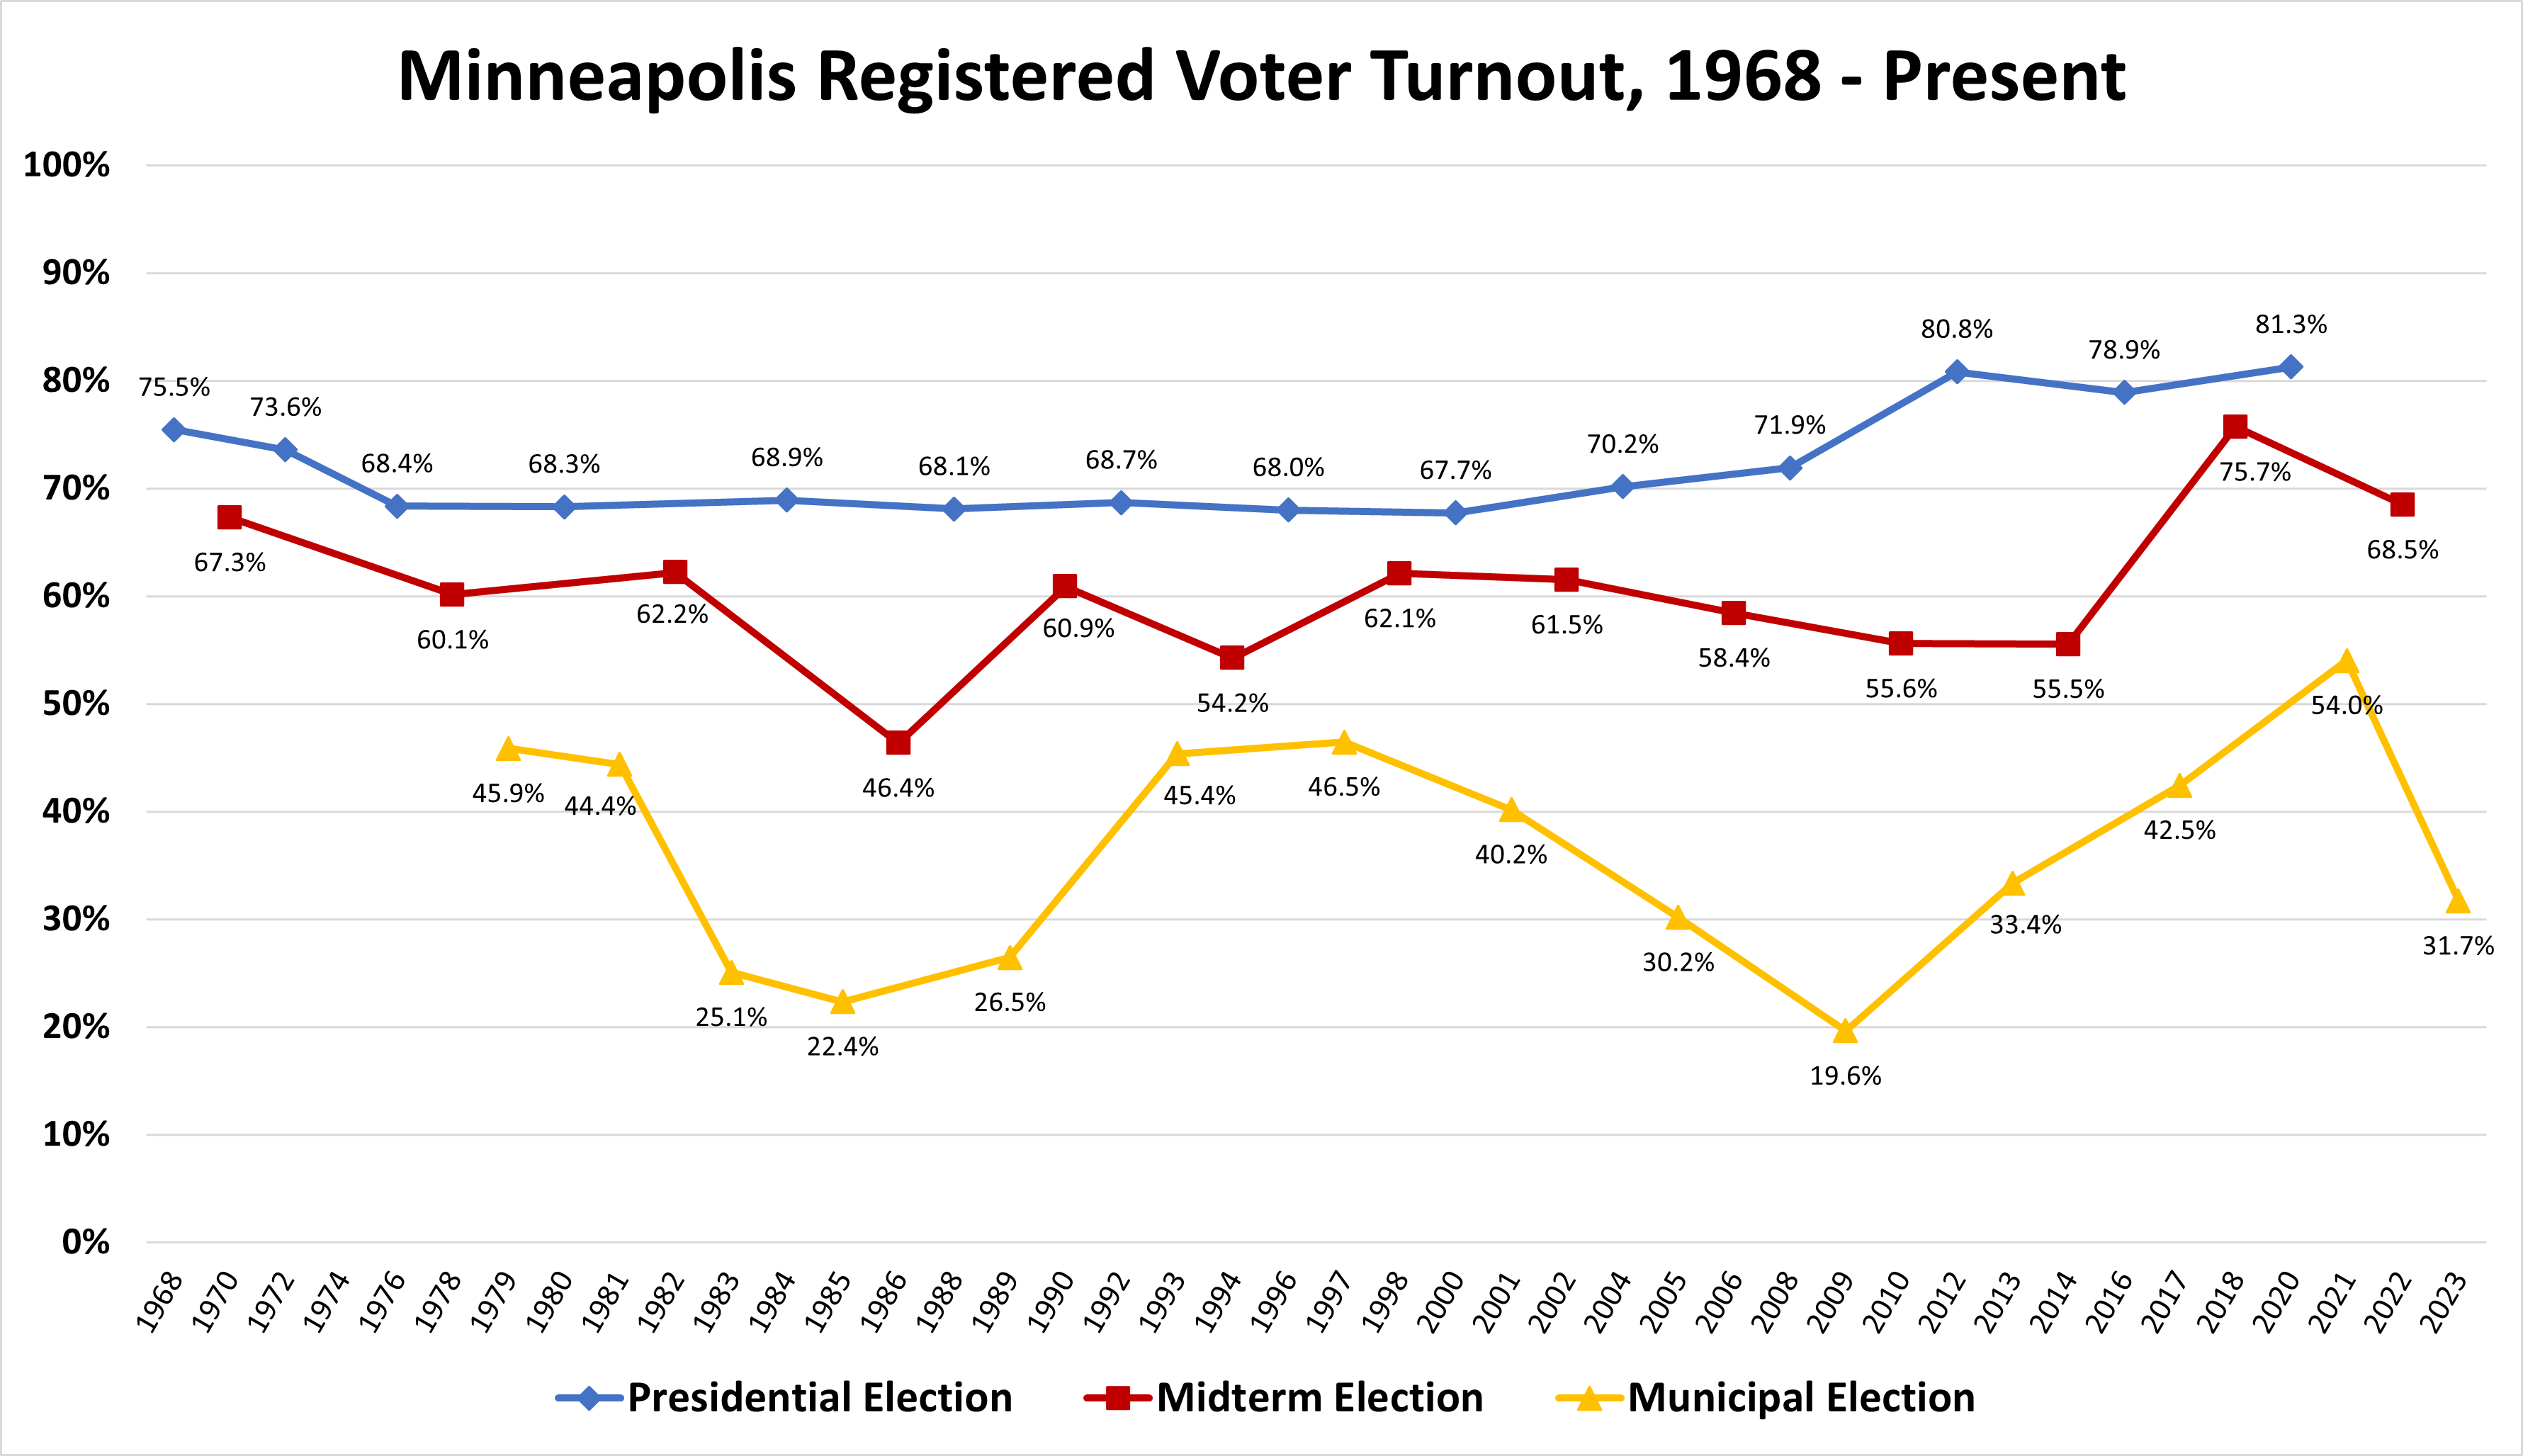 This graph shows Minneapolis voter turnout in presidential, midterm and municipal elections.